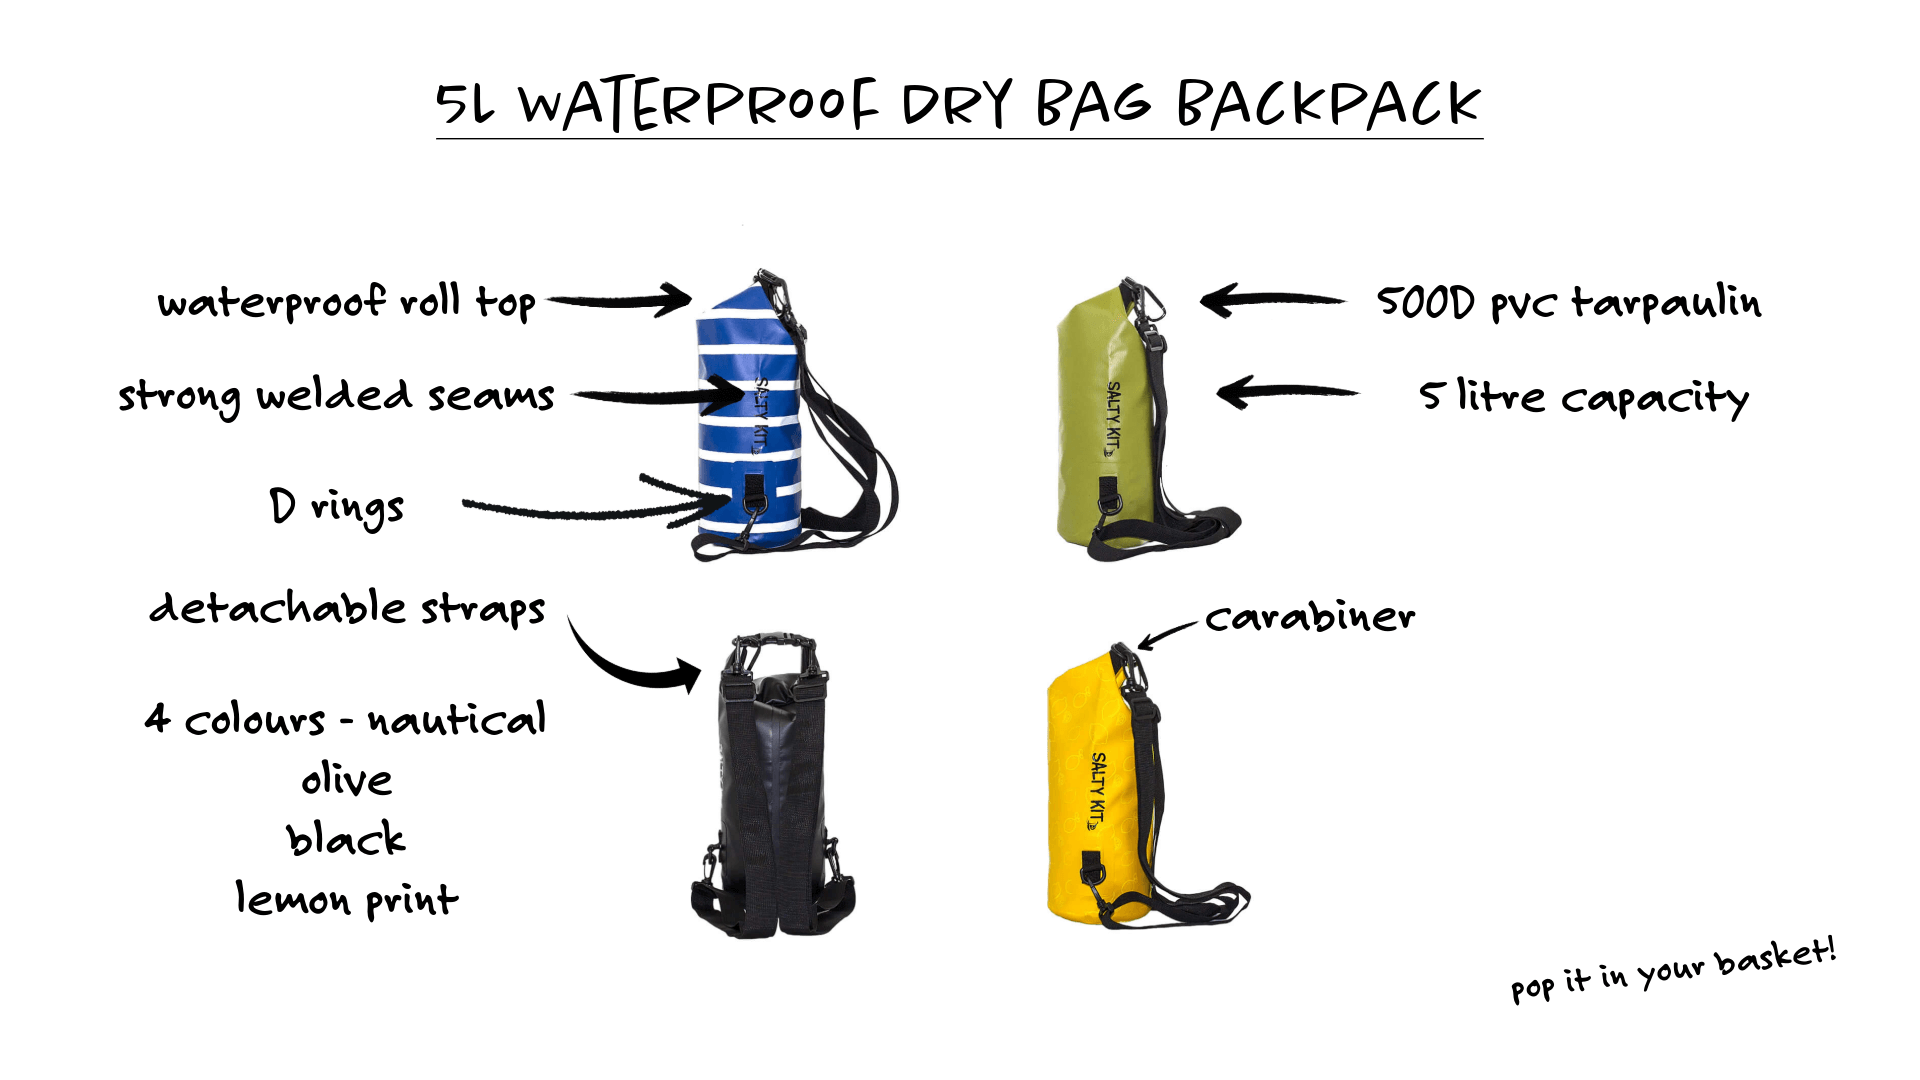 all of the USPs for the 5 litre waterproof backpack such as - waterproof roll top, strong welded seams, D rings, carabiner, in 4 colours black, olive, nautical blue & white stripe and yellow with lemon print, 500D pvc tarpaulin, 5 litre capacity, detachable straps,  so pop it in your basket!